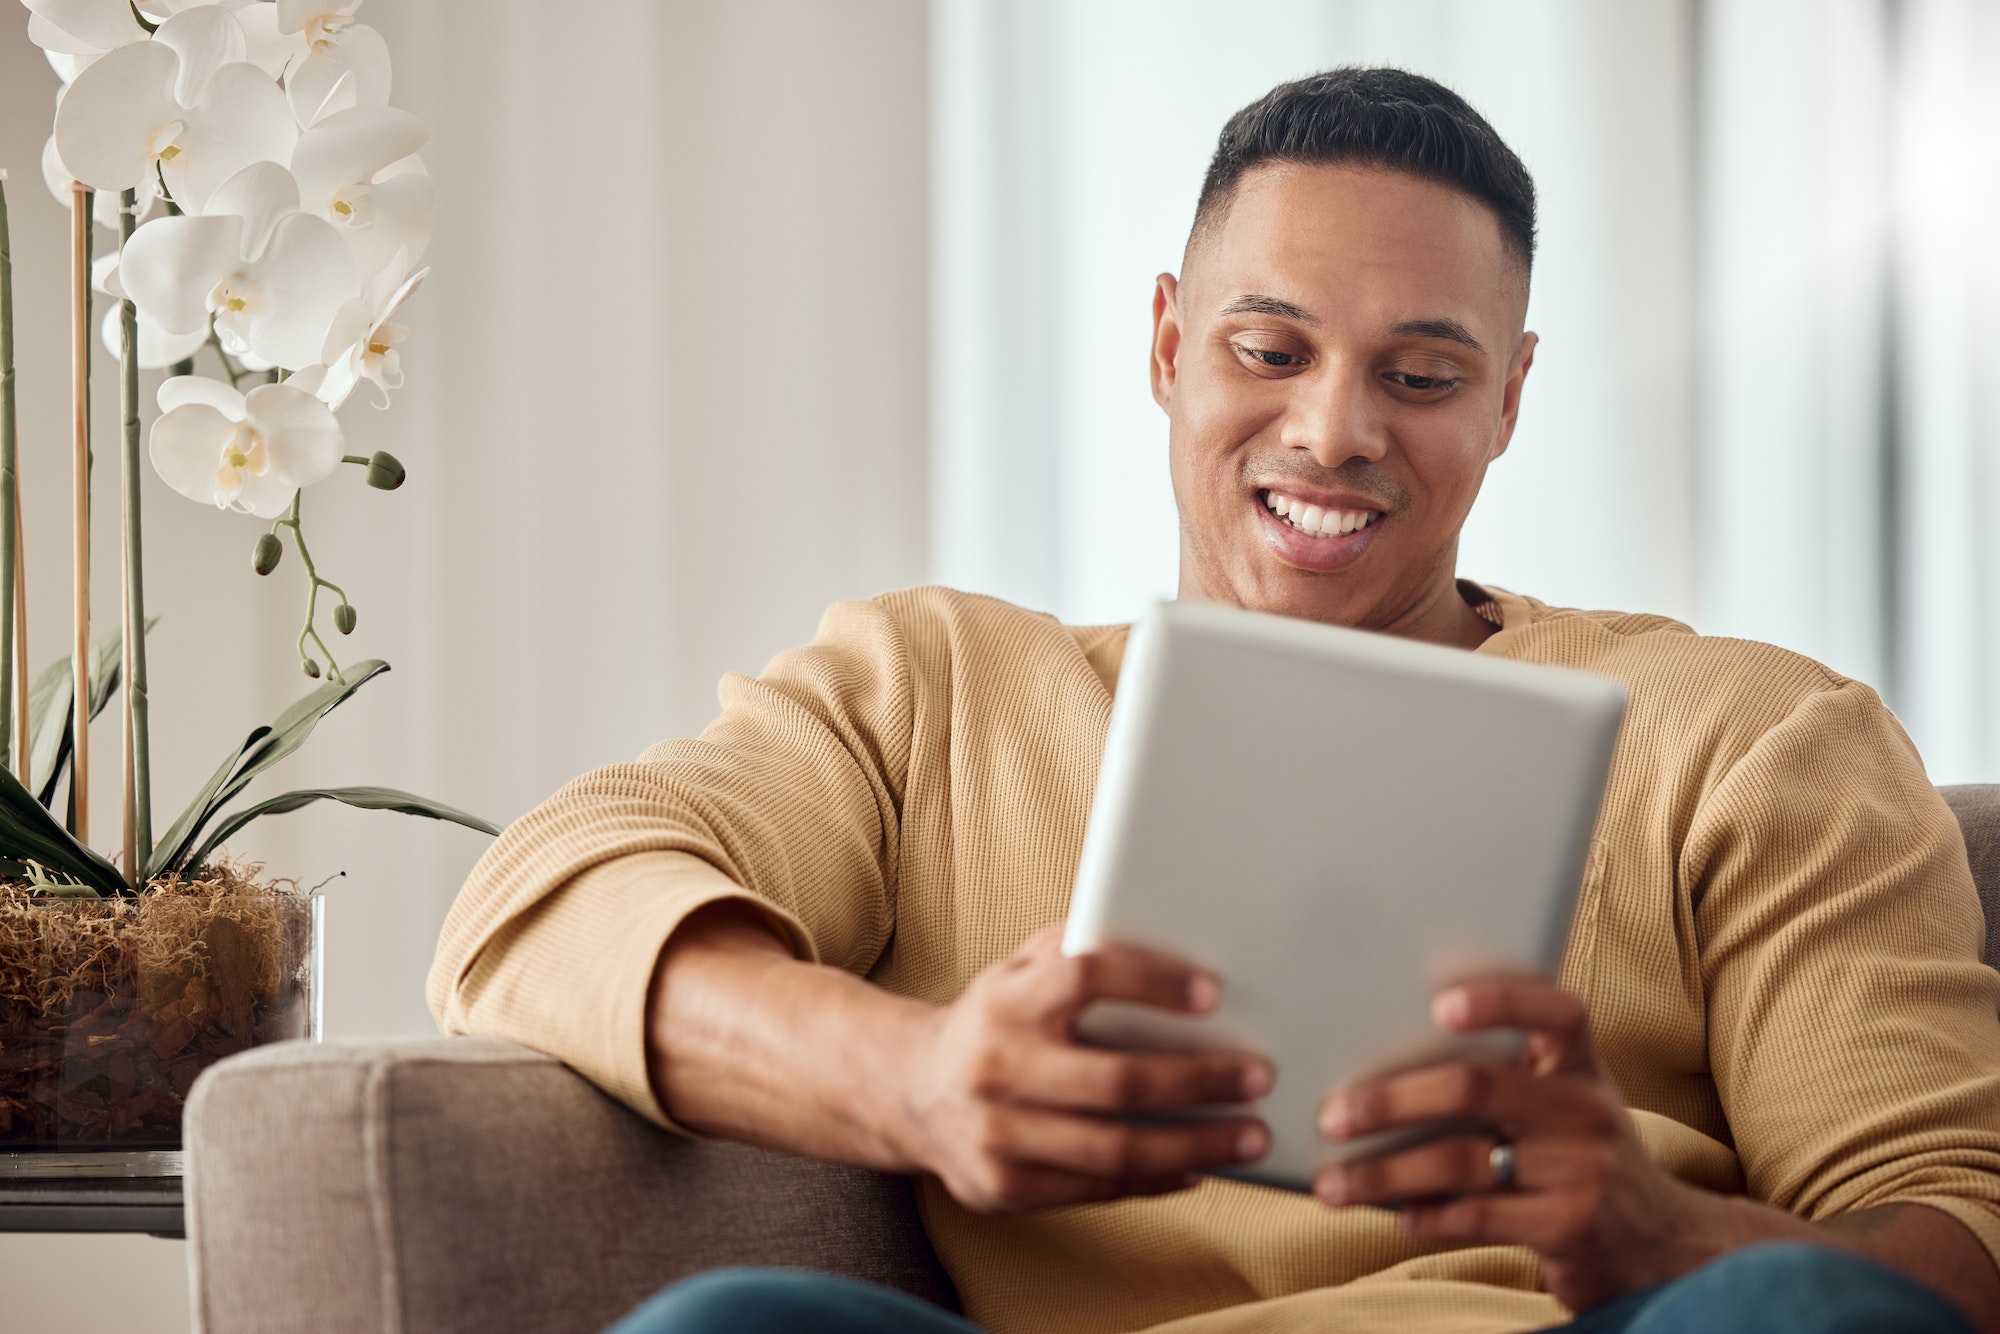 Tablet, sofa and black man with website information, video subscription service or surfing social m